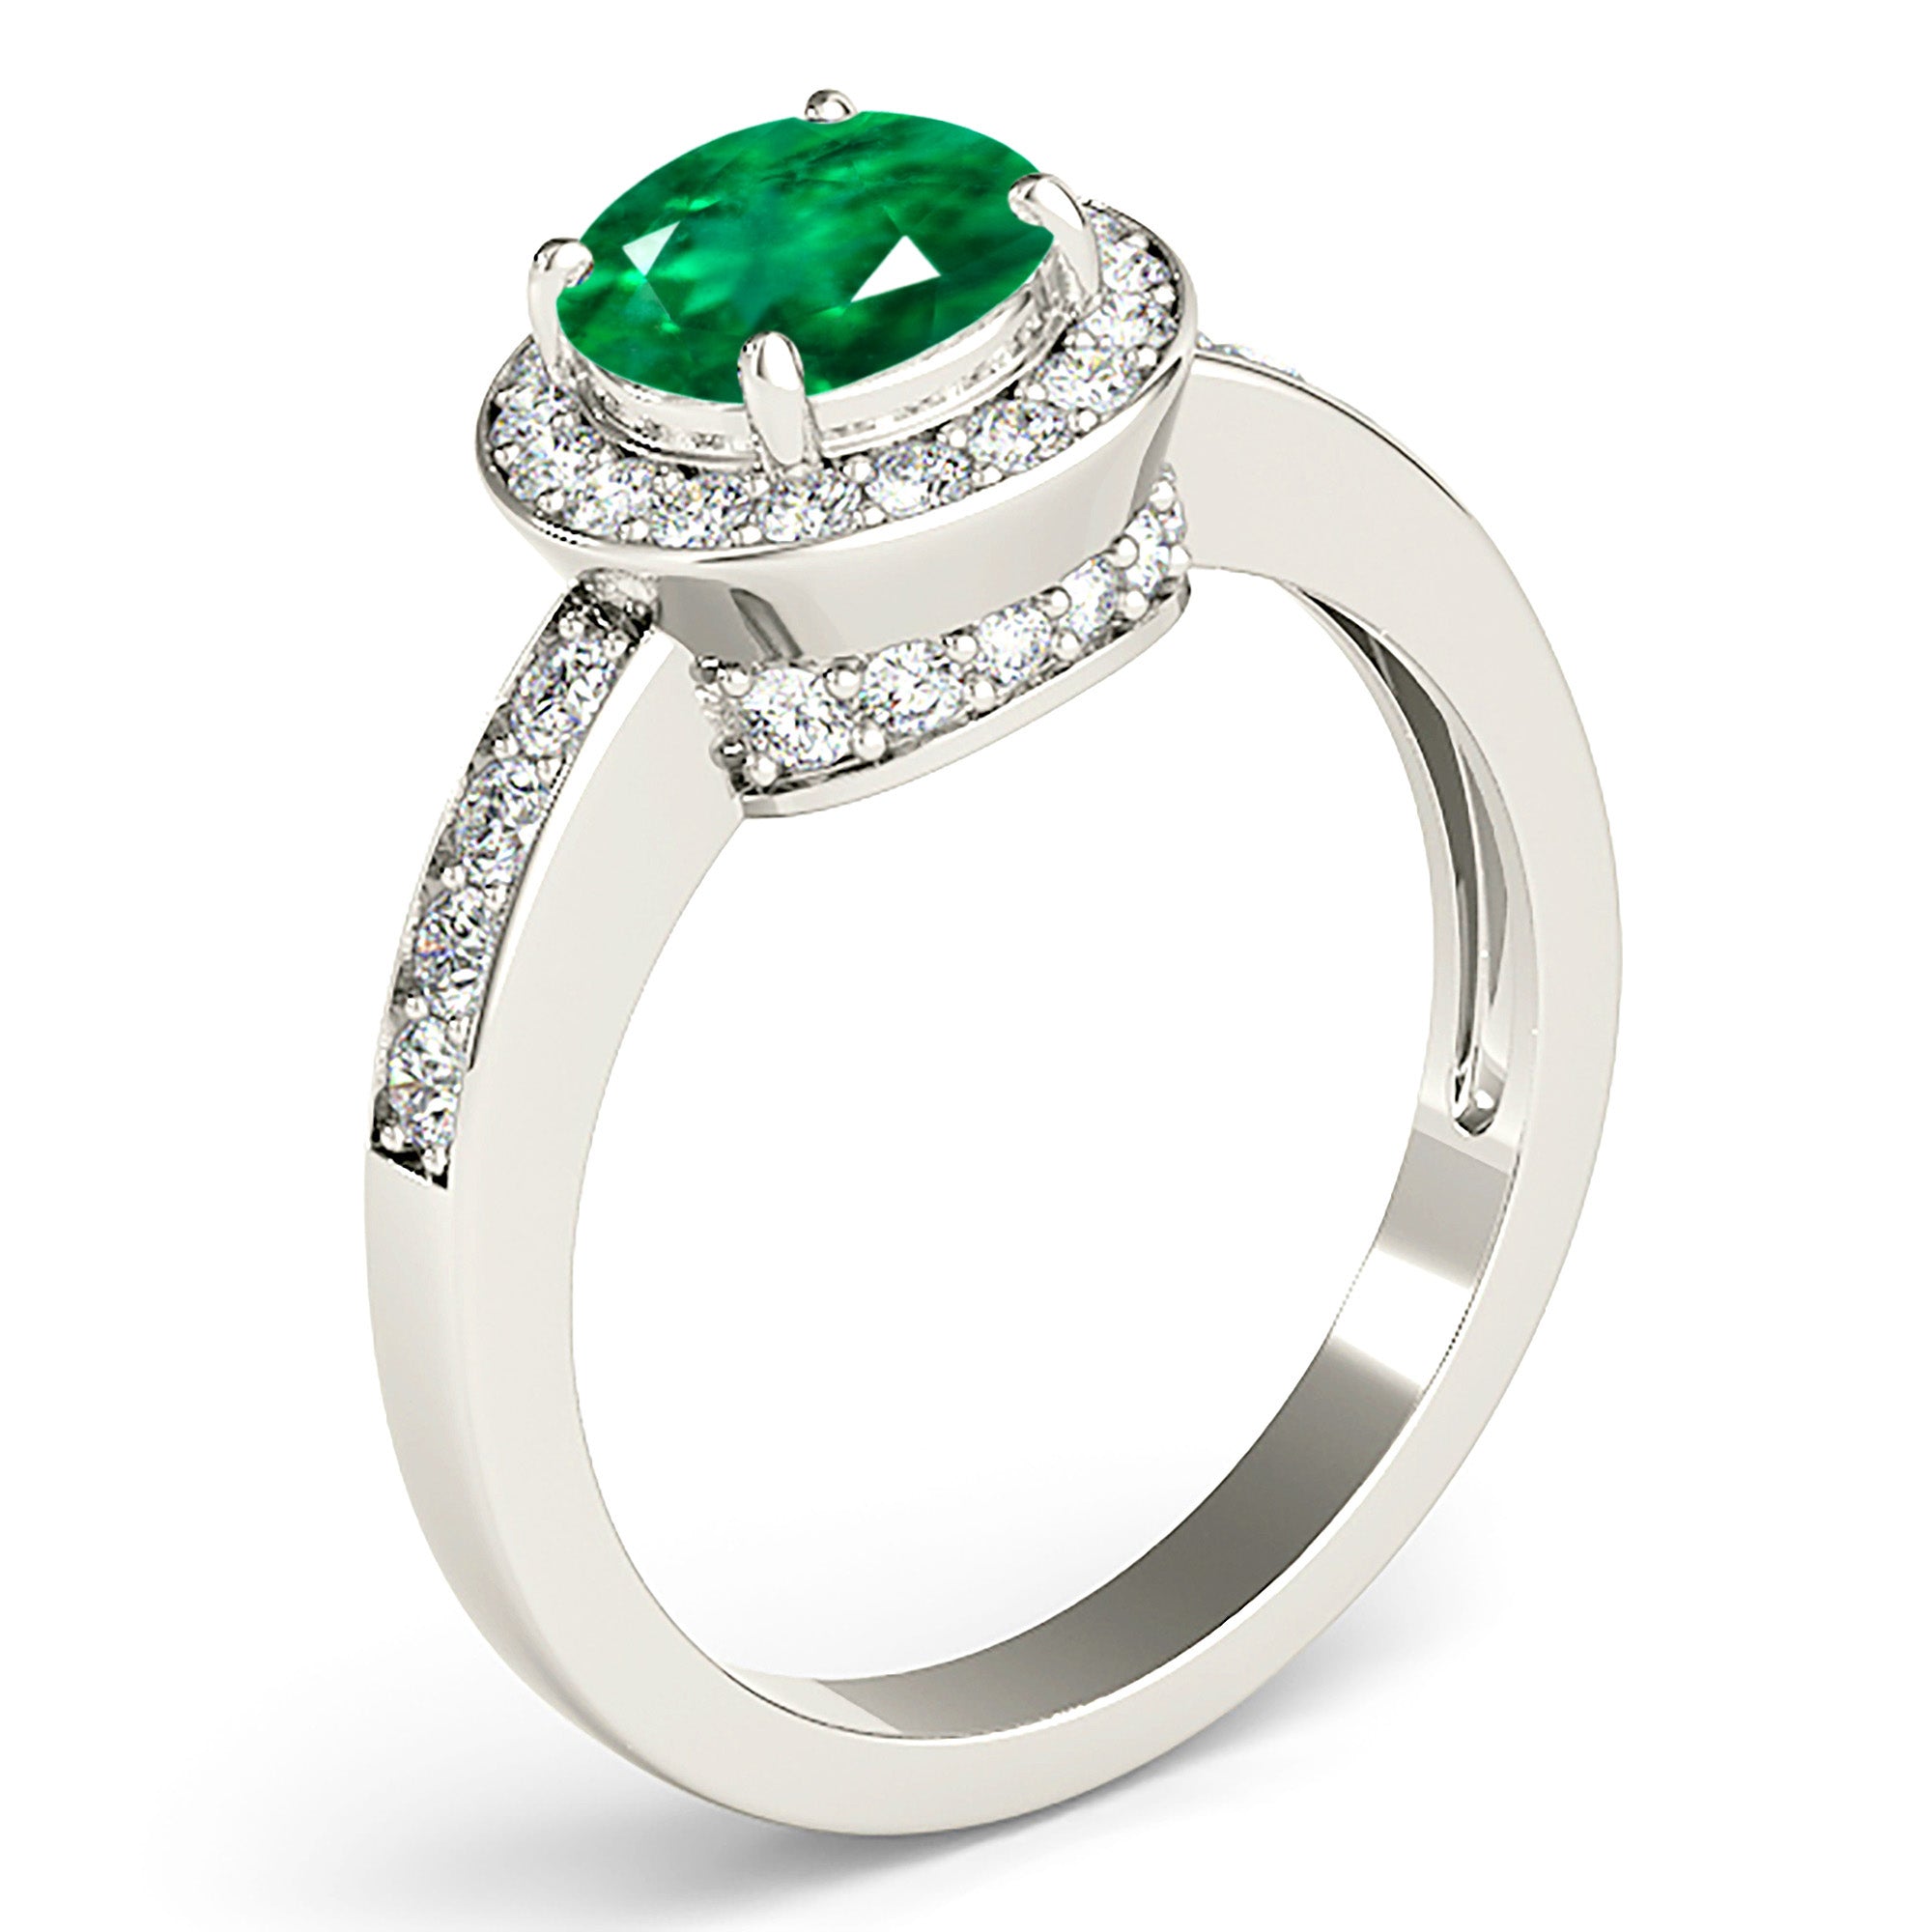 1.75 ct. Genuine Emerald Ring With 0.50 ctw. Channel Set Diamond Halo and Band,Accent Diamond Bridge-in 14K/18K White, Yellow, Rose Gold and Platinum - Christmas Jewelry Gift -VIRABYANI